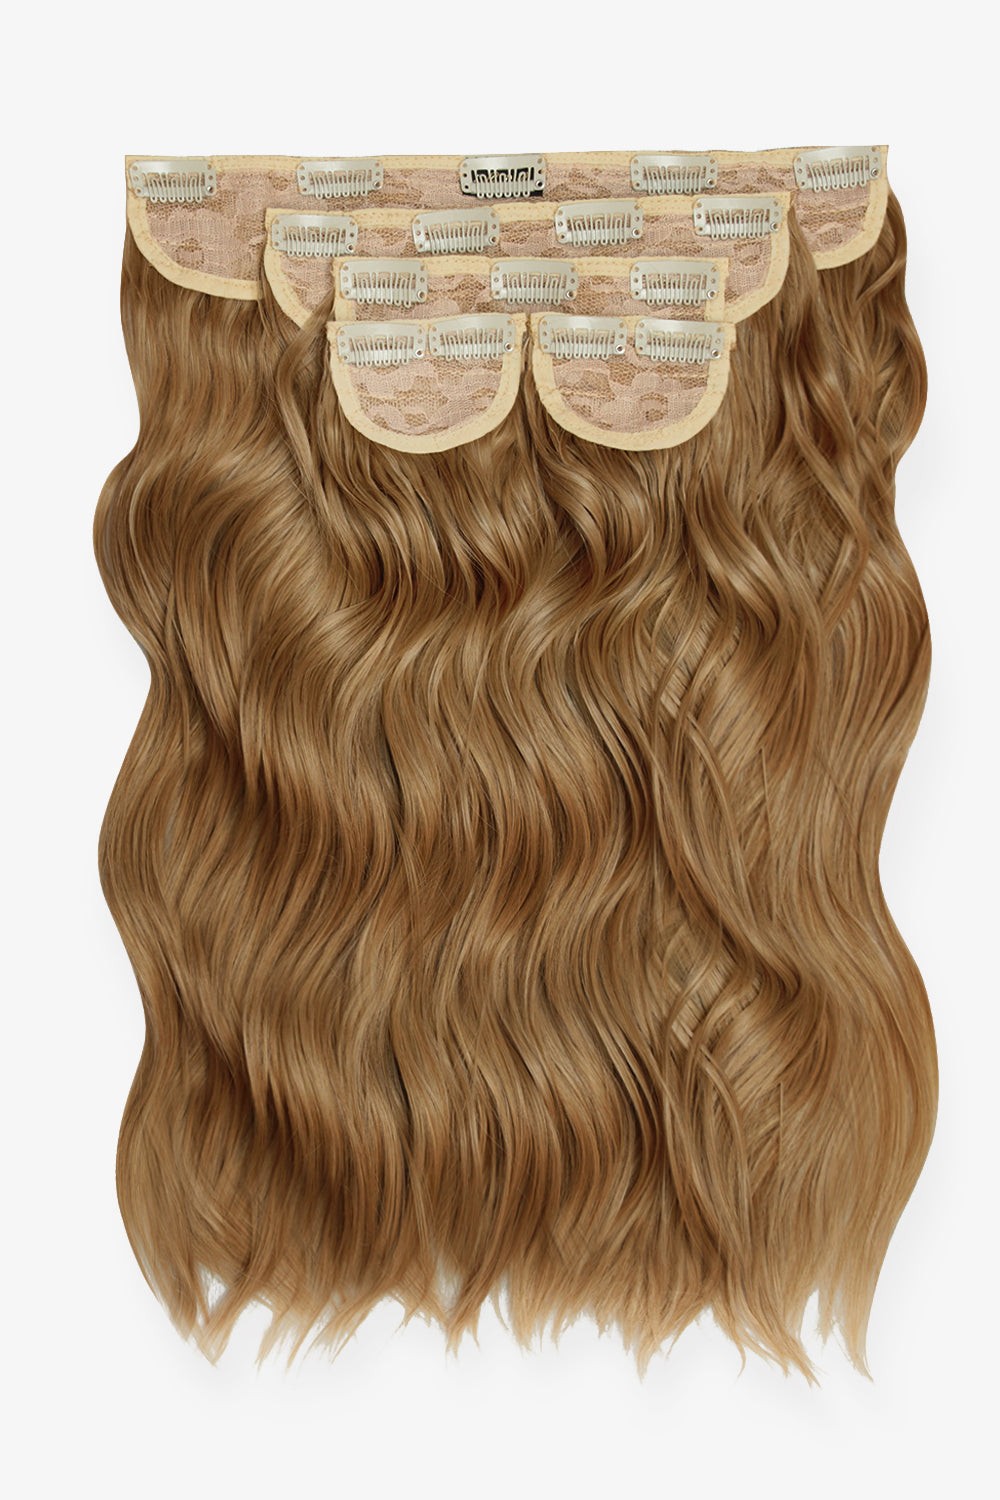 Super Thick 16’’ 5 Piece Brushed Out Wave Clip In Hair Extensions + Hair Care Bundle - Harvest Blonde